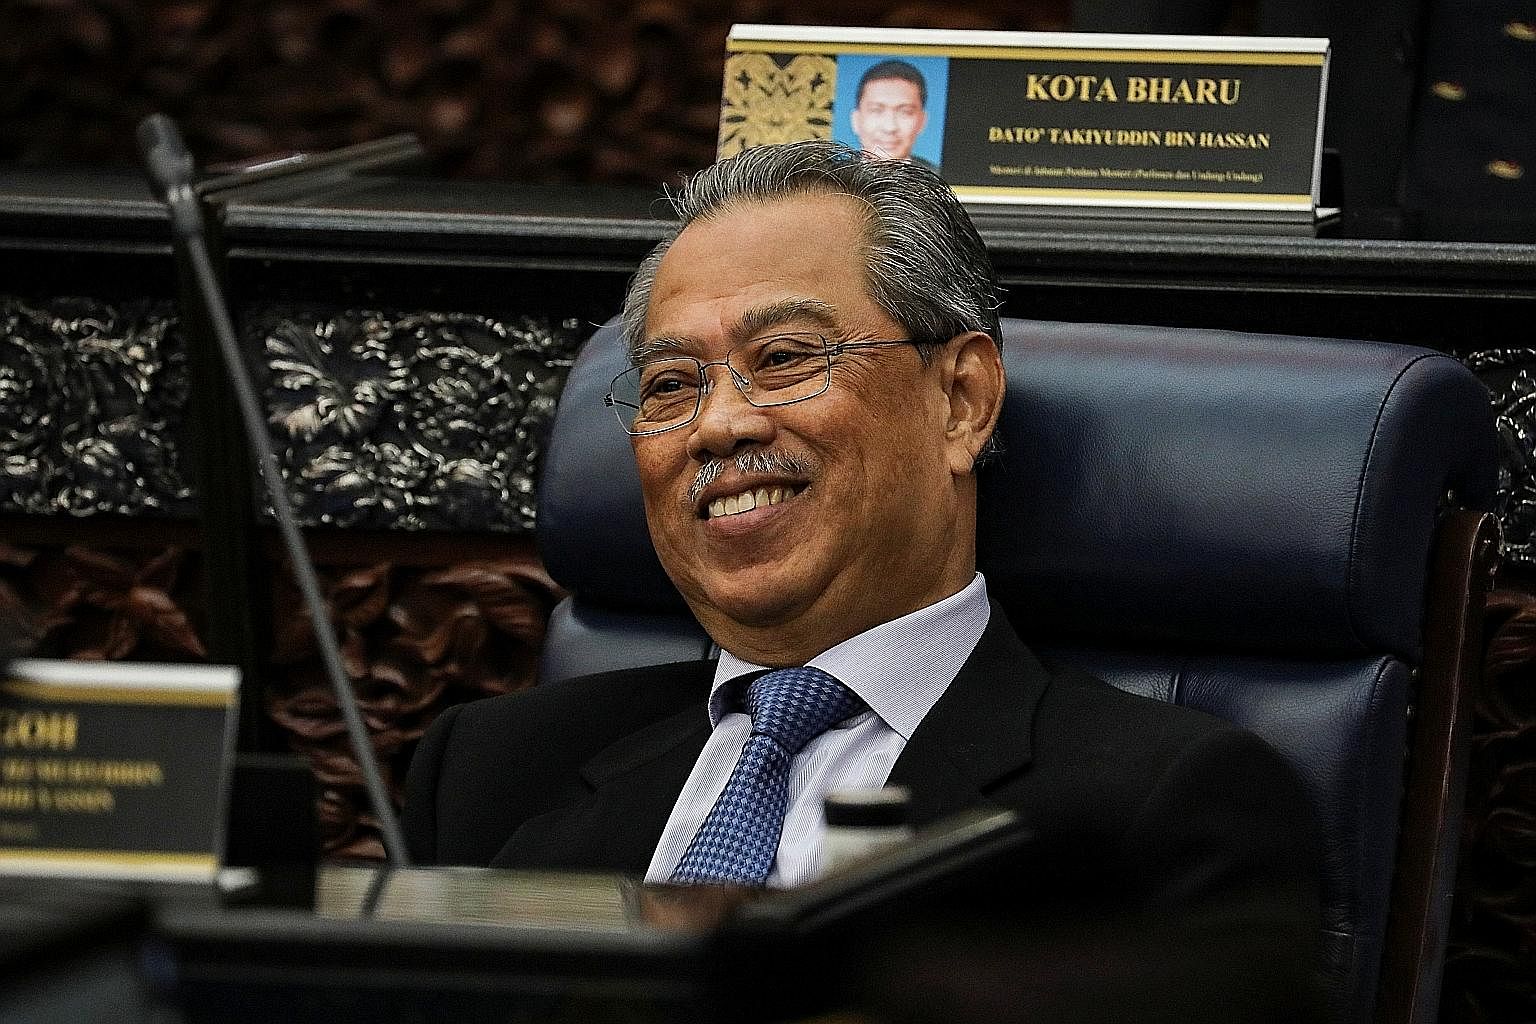 Prime Minister Muhyiddin Yassin in Parliament on July 13, when he won narrow backing to replace the Speaker. PHOTO: REUTERS Tun Dr Mahathir Mohamad leaving the National Palace on Feb 24, the day he resigned as prime minister. PHOTO: AGENCE FRANCE-PRE